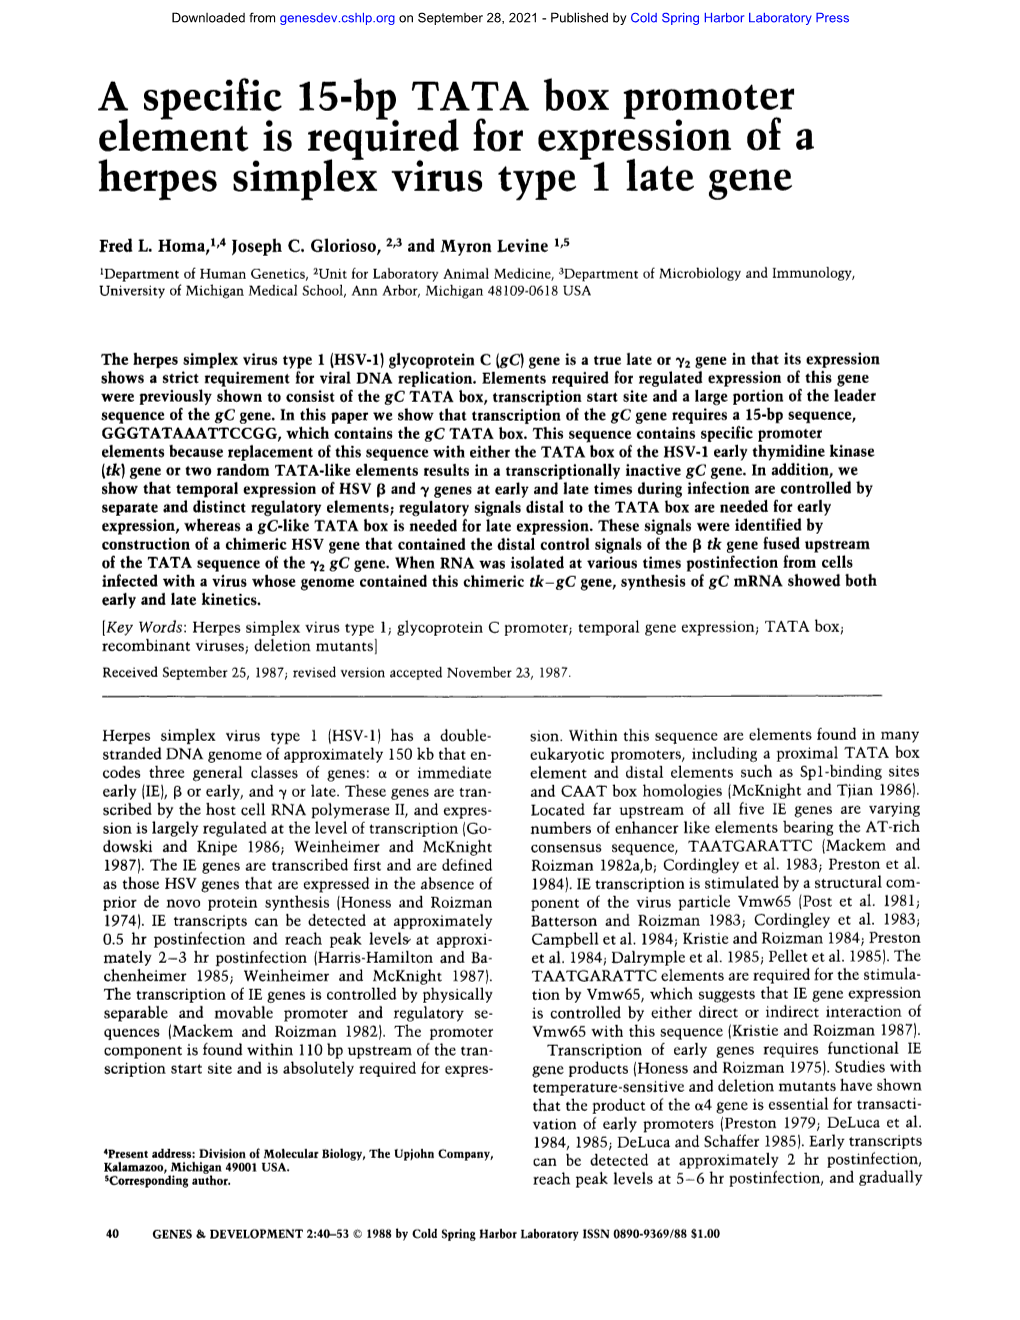 A Specific 15-Bp TATA Box Promoter Element Is Required for Expression of a Herpes Simplex Virus Type 1 Late Gene